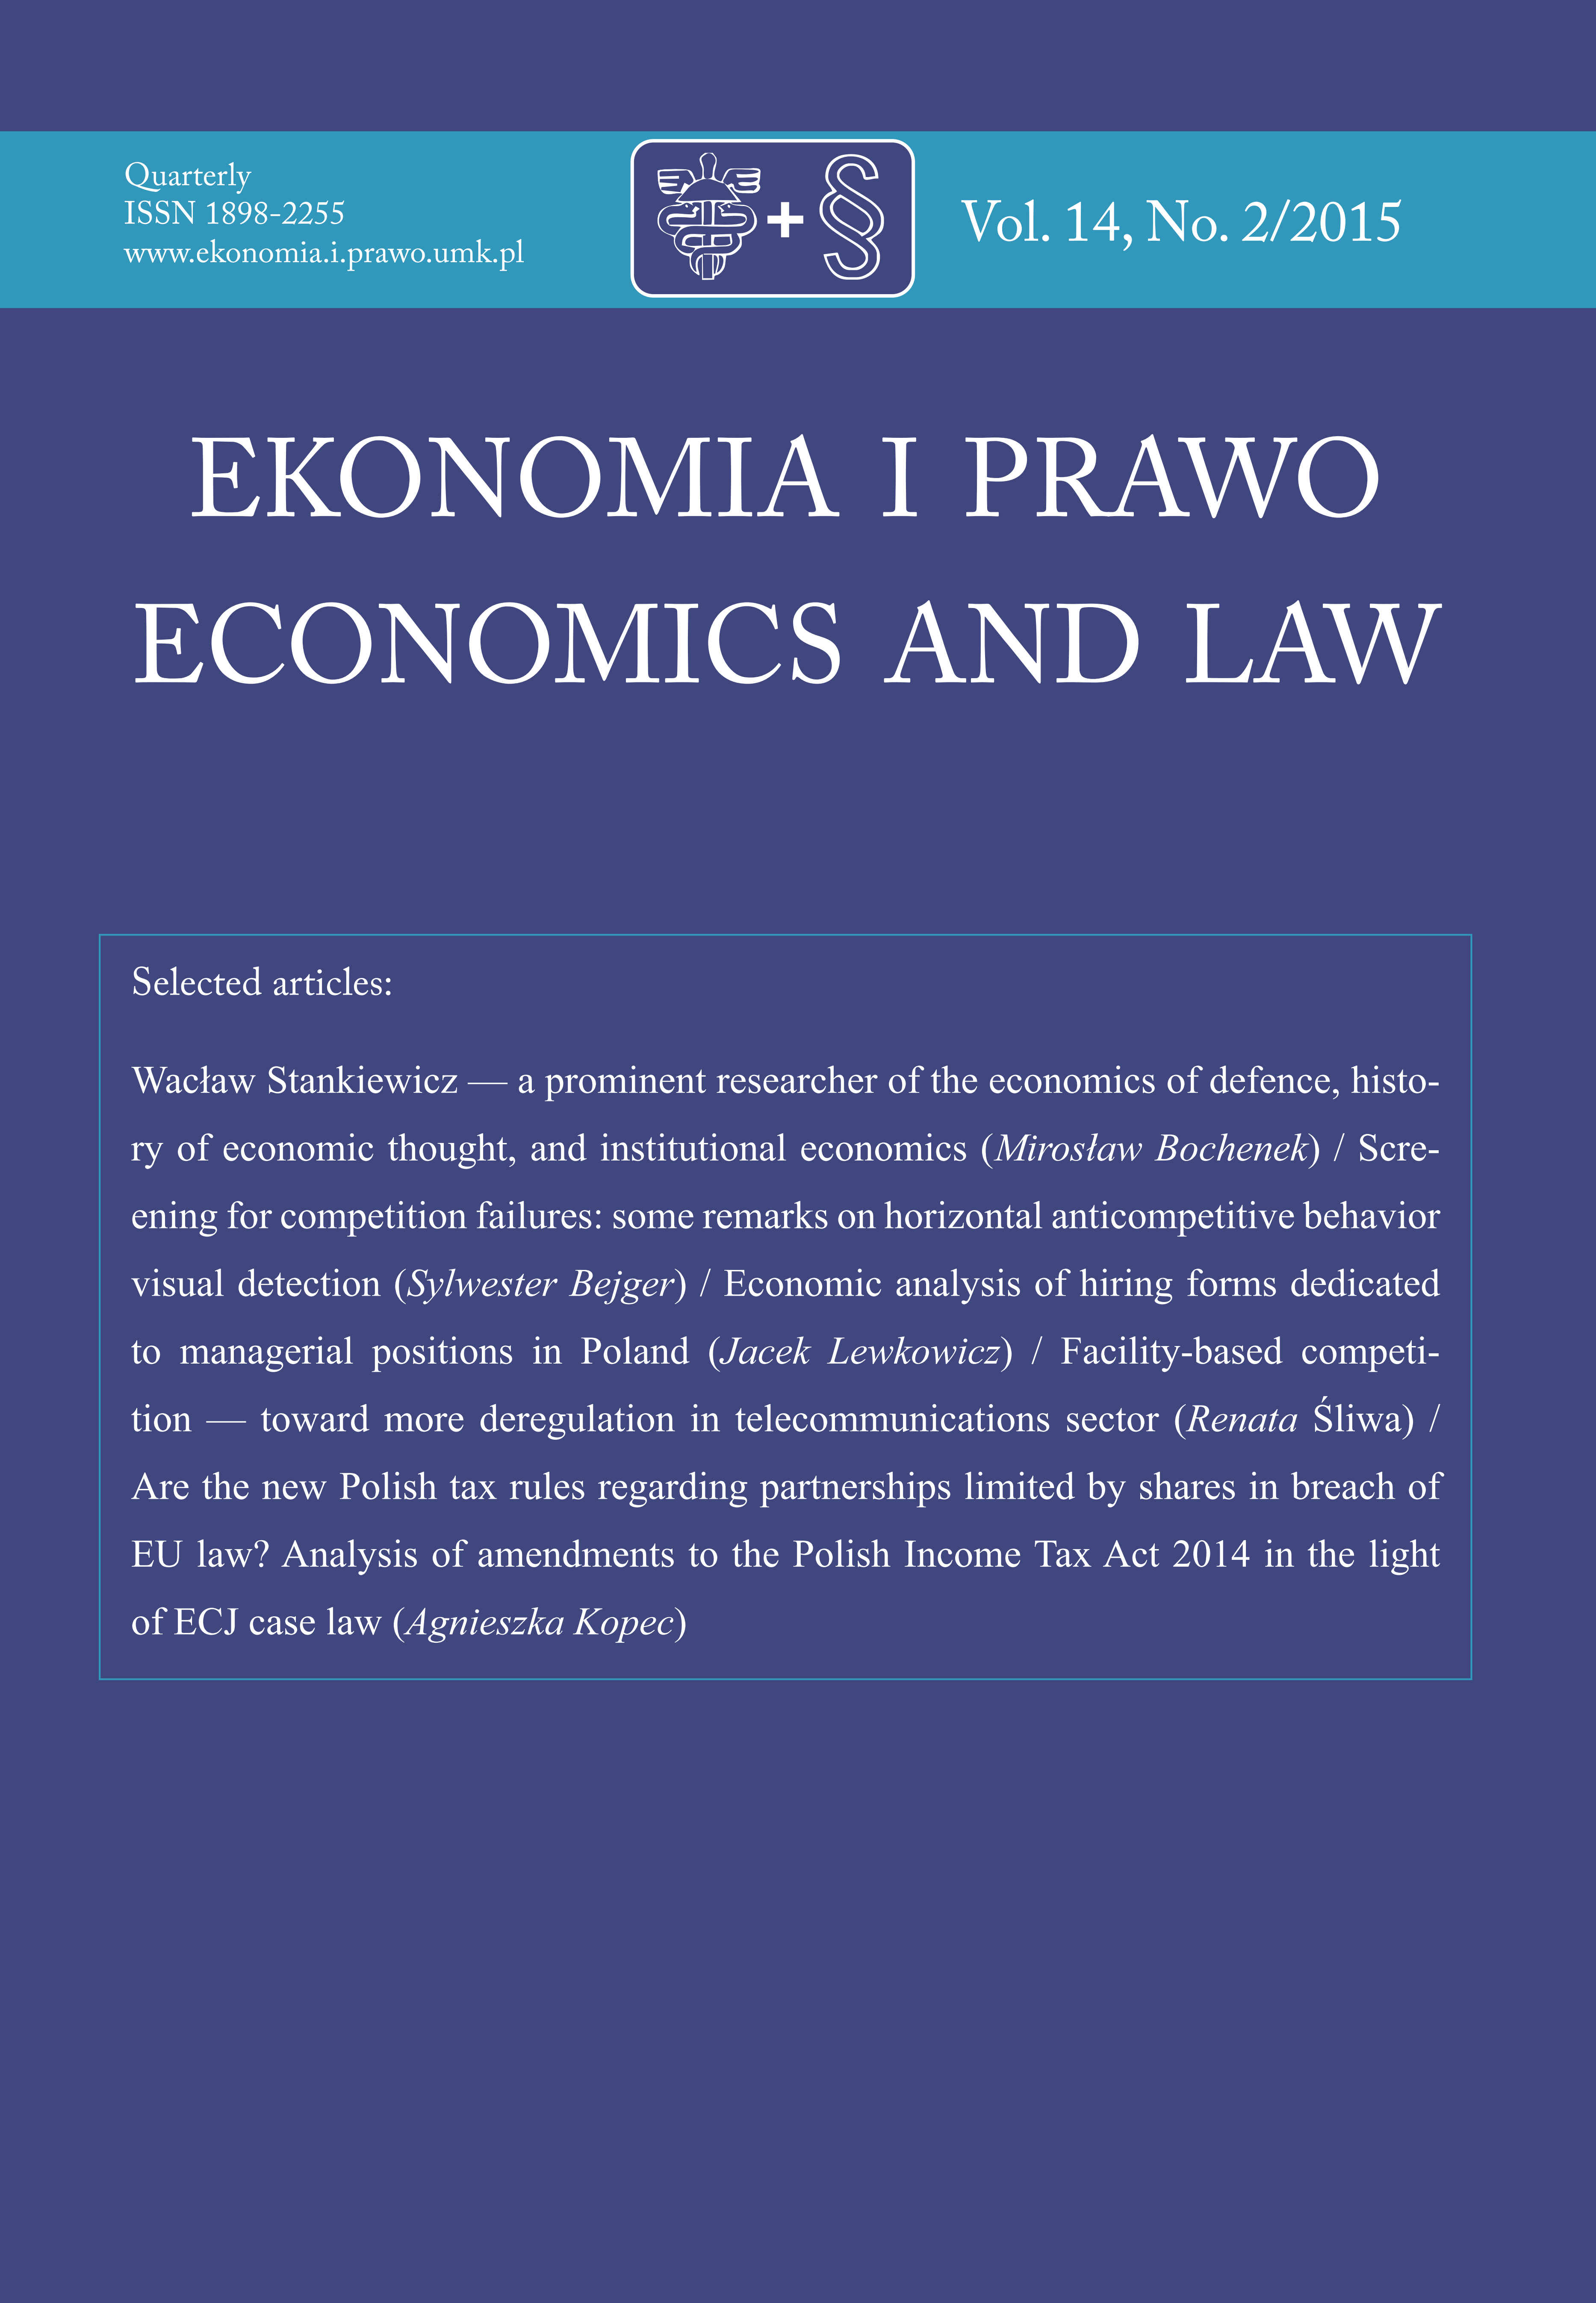 THE IMPORTANCE OF LAW AND ECONOMICS IN THE CONTEMPORARY ECONOMIC REALITY Cover Image